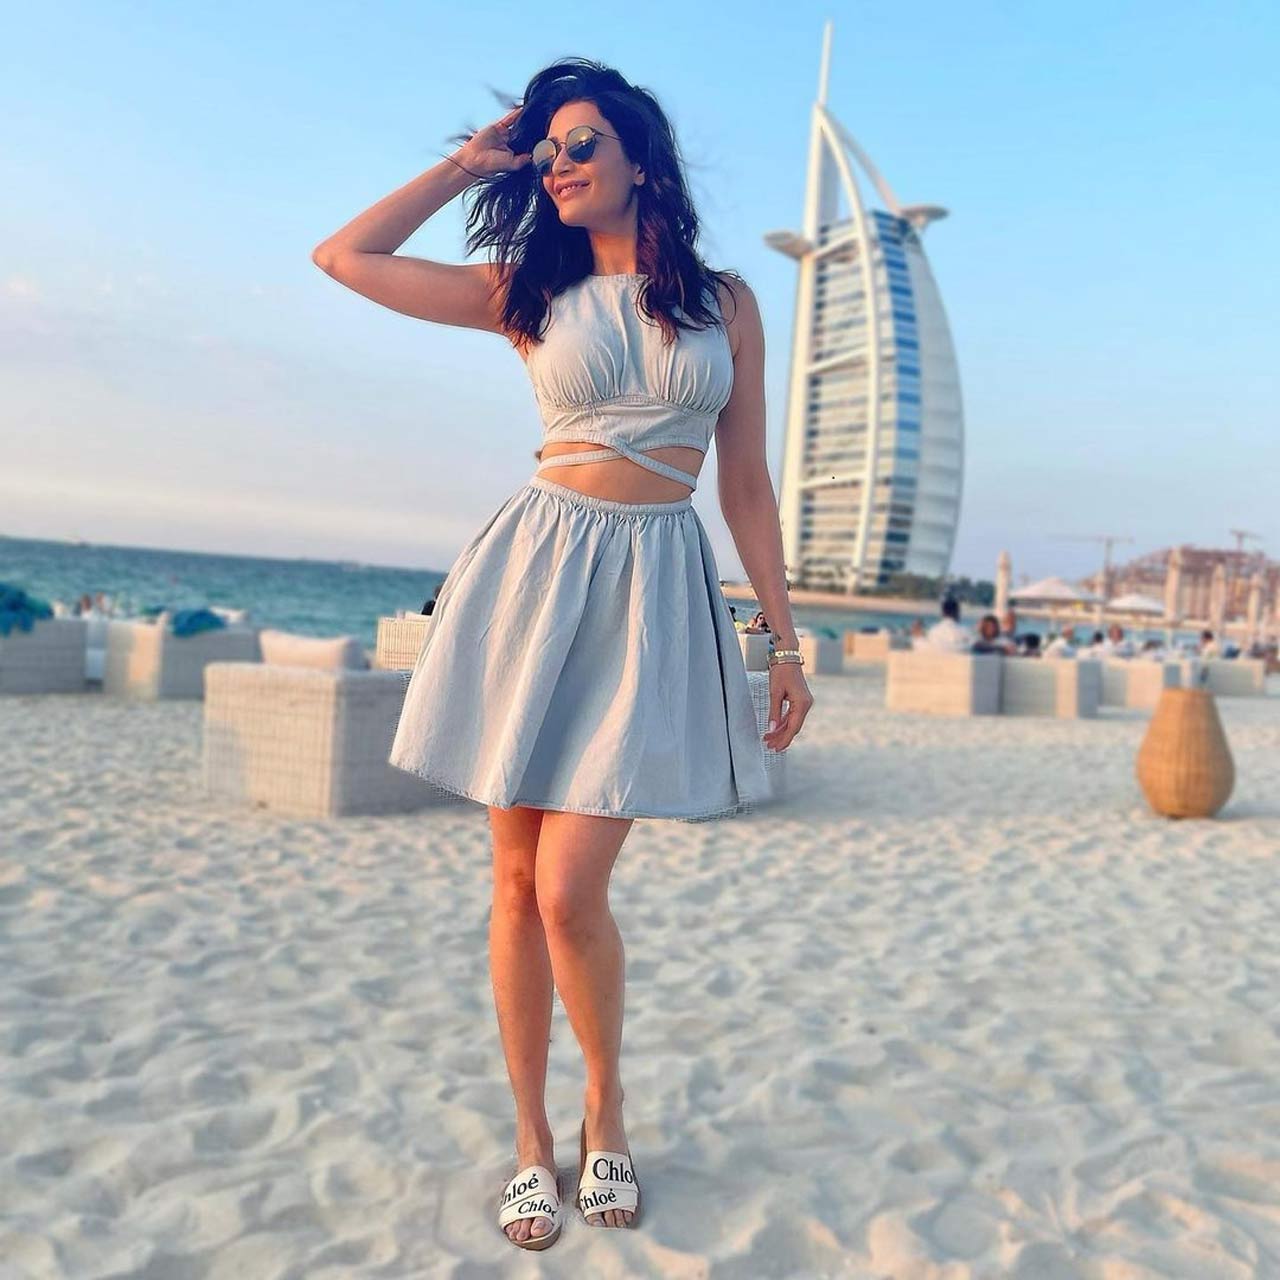 Karishma Tanna, who is said to tie the knot with her boyfriend Varun Bangera soon, had also shared a series of photos from her Dubai vacation, giving her social media followers a glimpse of her beautiful trip. Karishma, in one of the photos, was seen wearing a skater skirt, paired with a crop top, which took the internet by storm. 